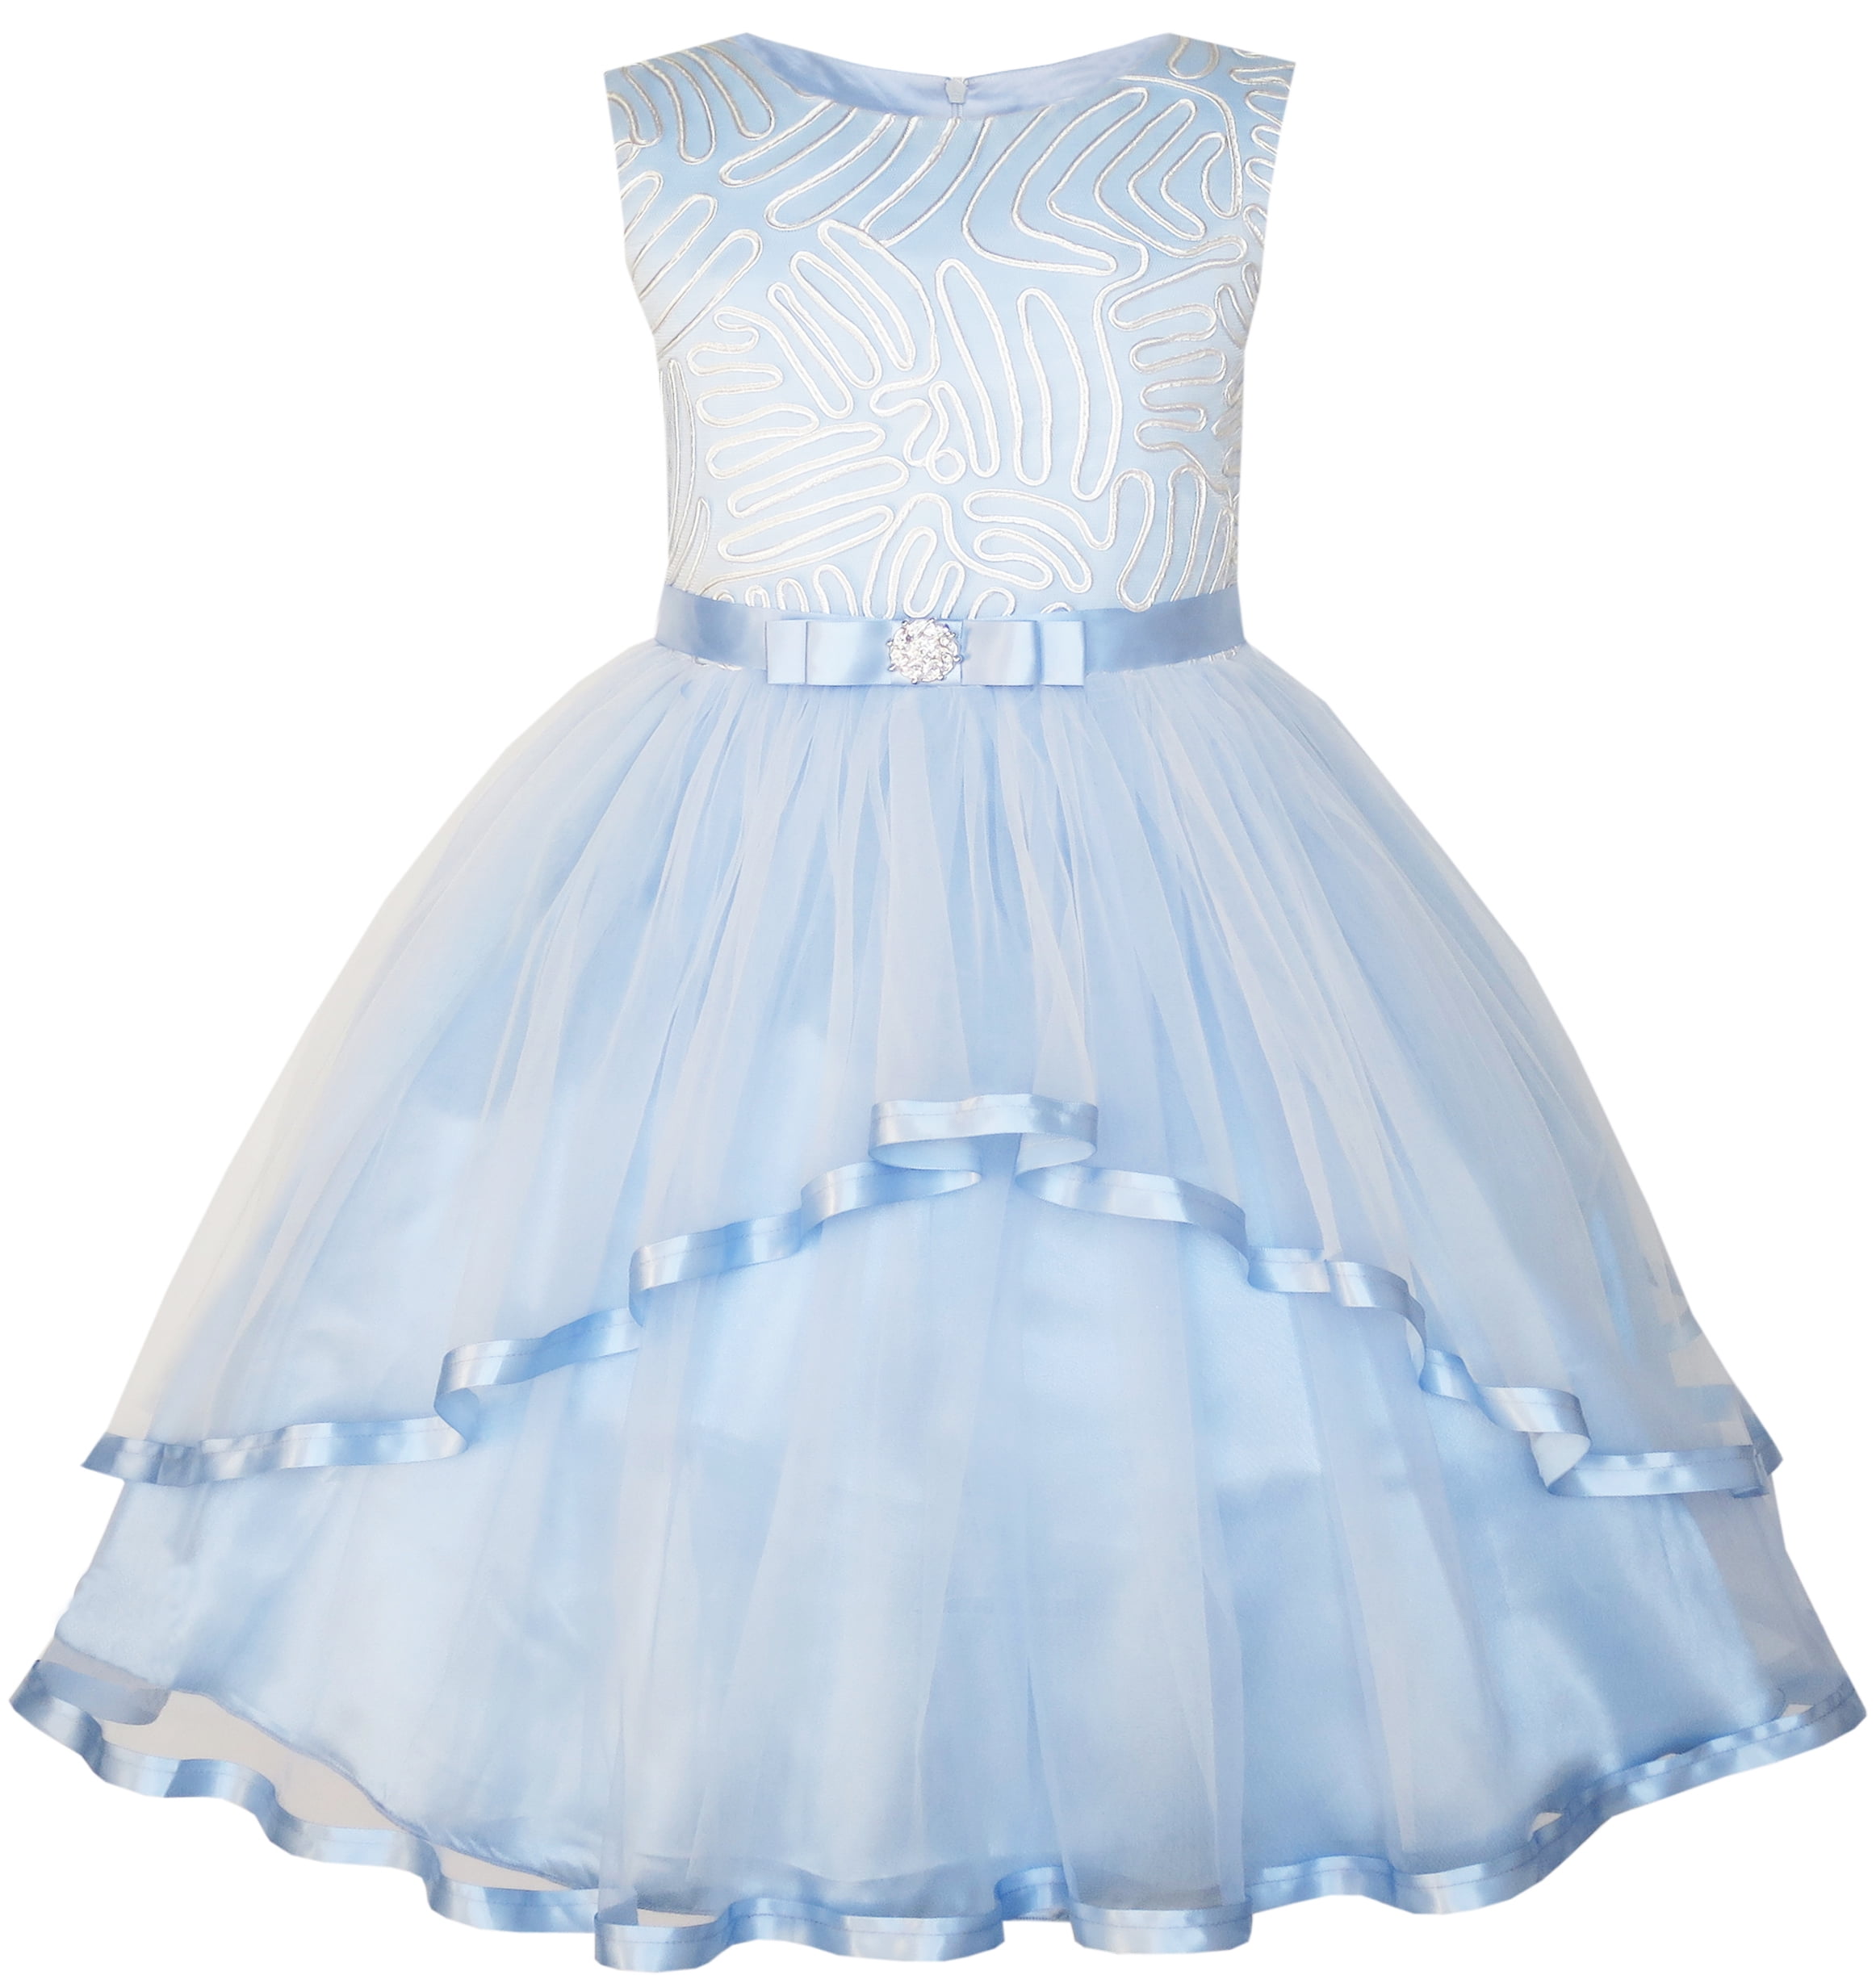 Sunny Fashion Flower Girl Dress Elegant Party Ball Gowns Vintage Pageant Princess Formal Dress